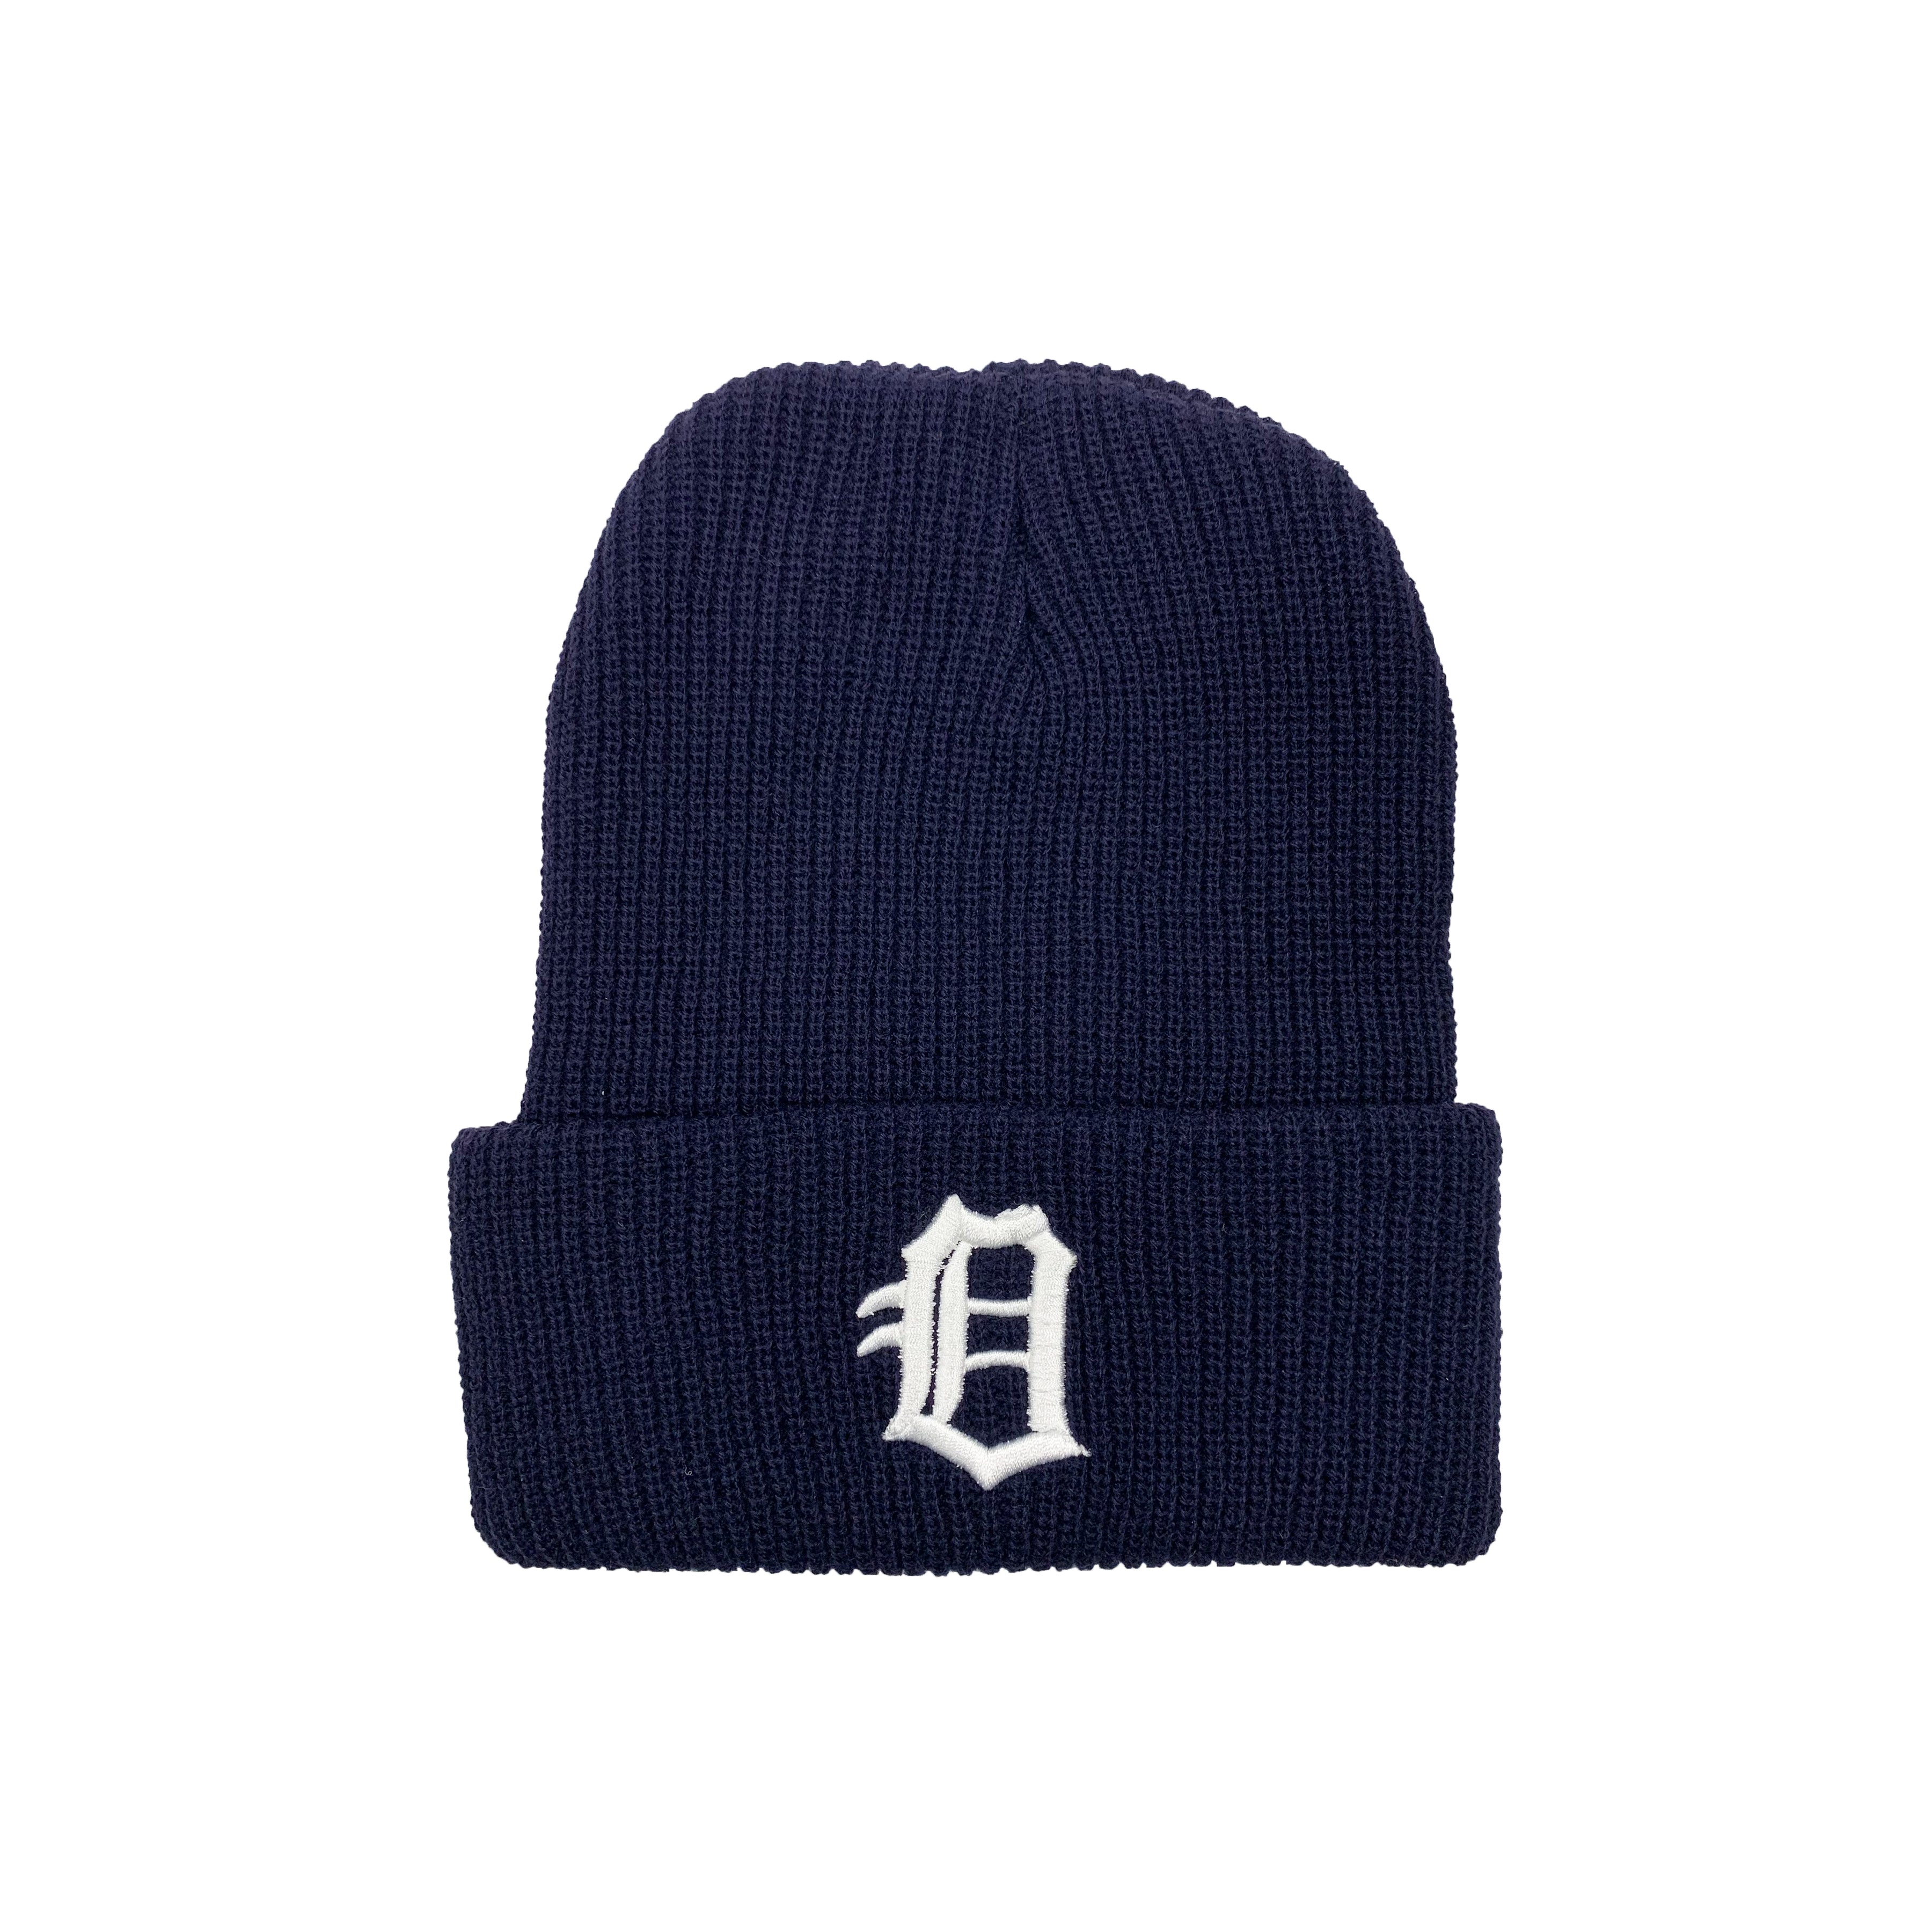 King O Knitted Beanie (Navy)